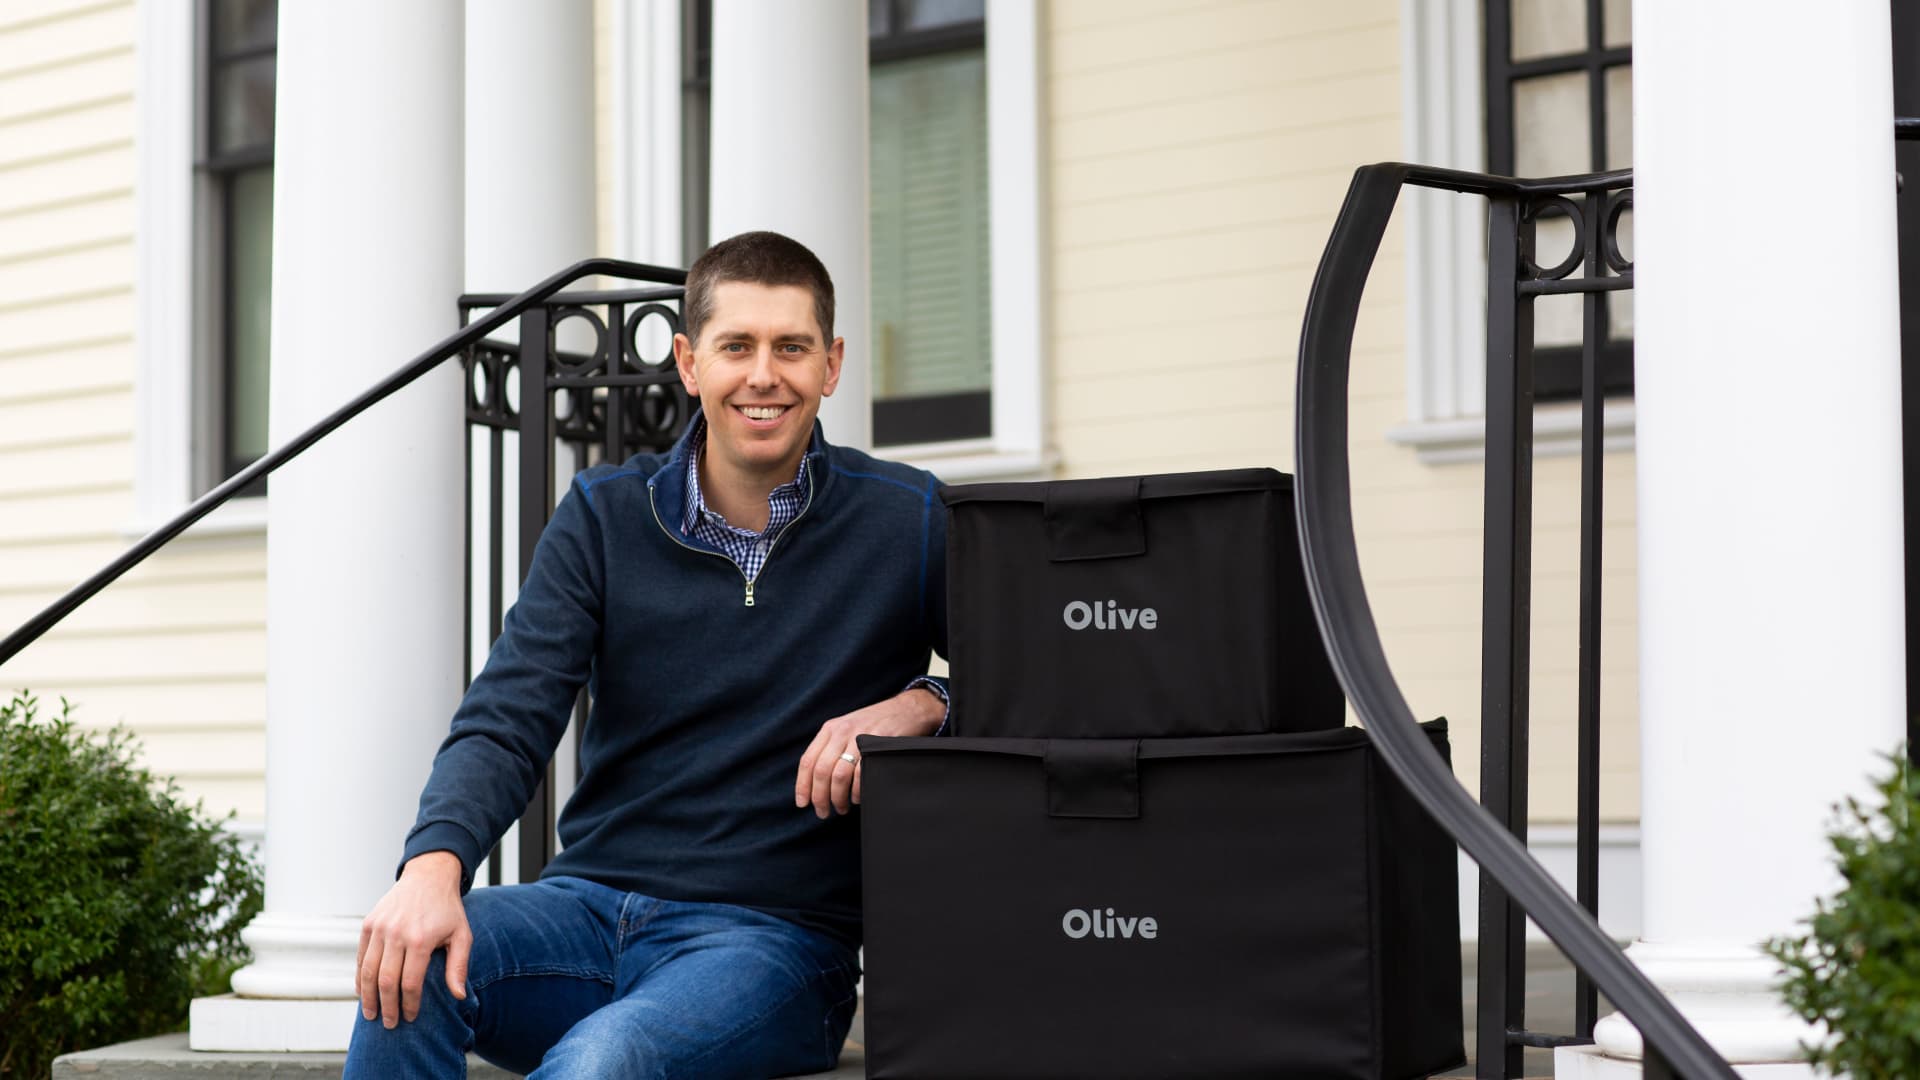 Nate Faust was inspired to start his new company, Olive, after seeing the huge amount of cardboard and other packaging in the trash in his neighborhood.